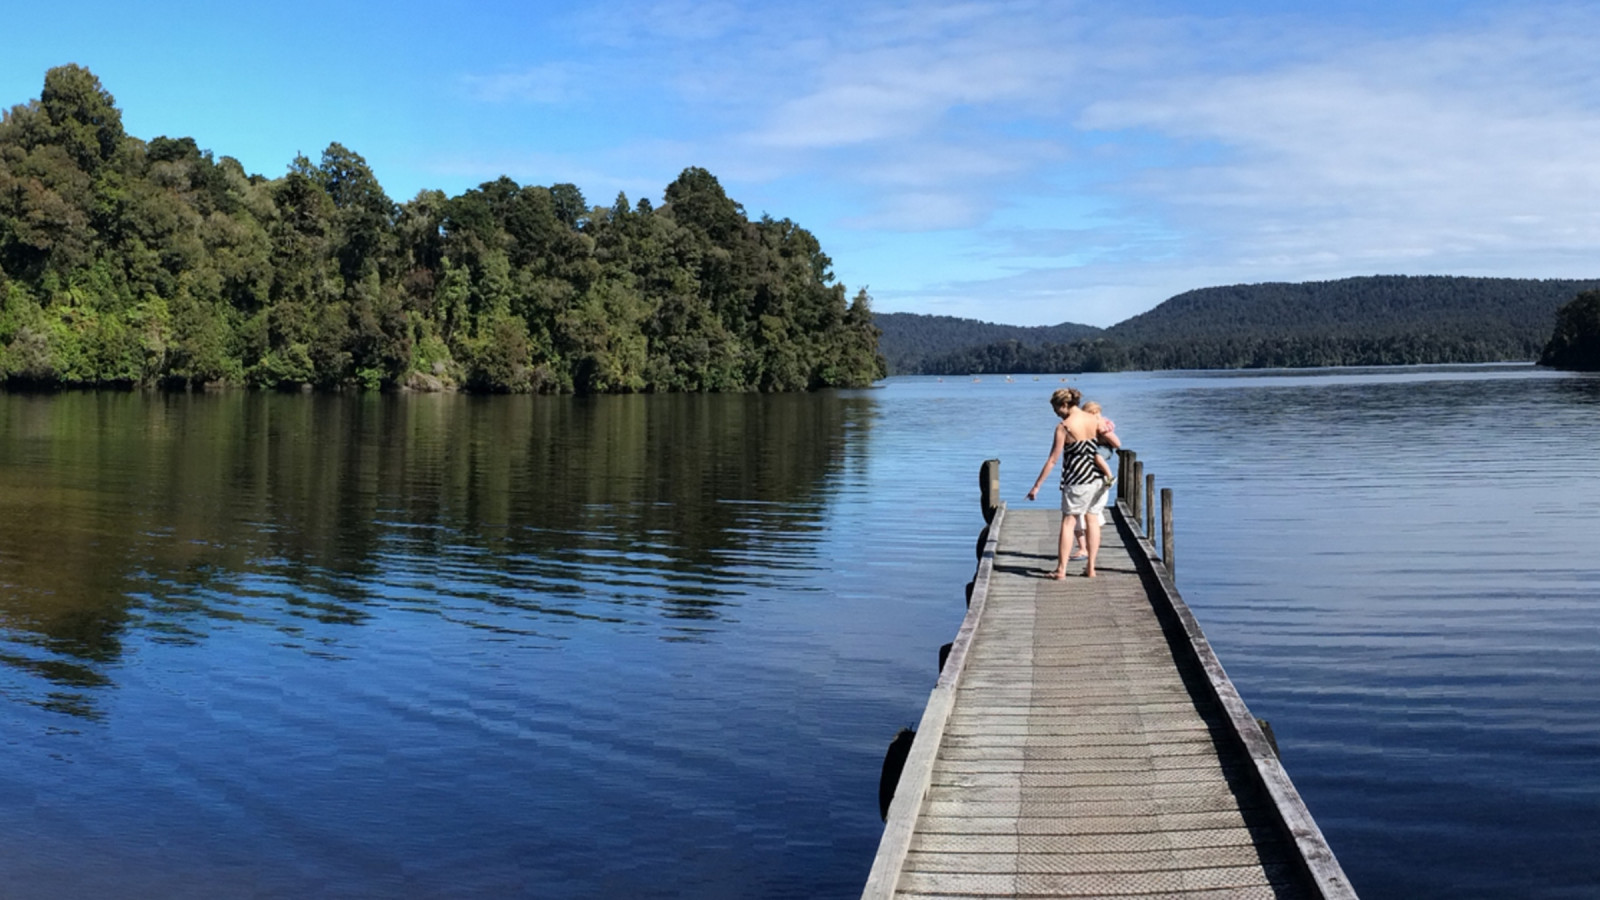 A person is walking along an old-fashioned jetty that extends into a lake. Native forest cloaks the hills behind and the sky and water are clear and blue.